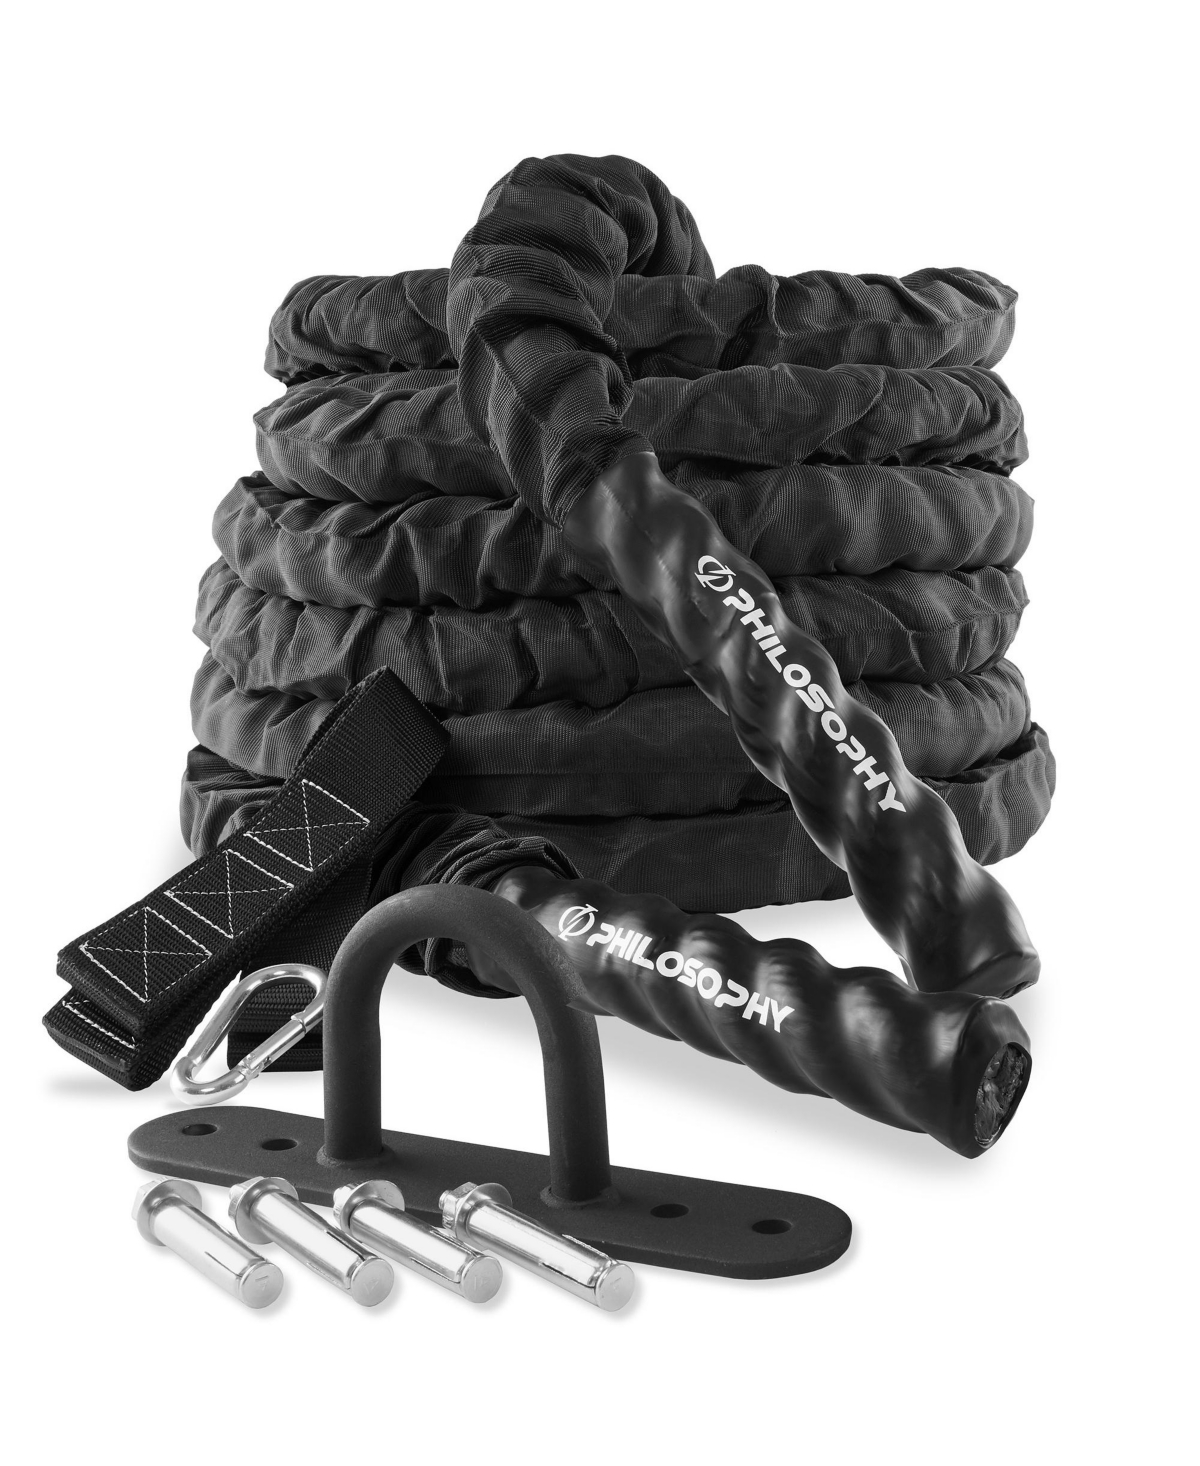 40 Foot Exercise Battle Rope 1.5 Inch Diameter with Cover and Anchor Kit - Black